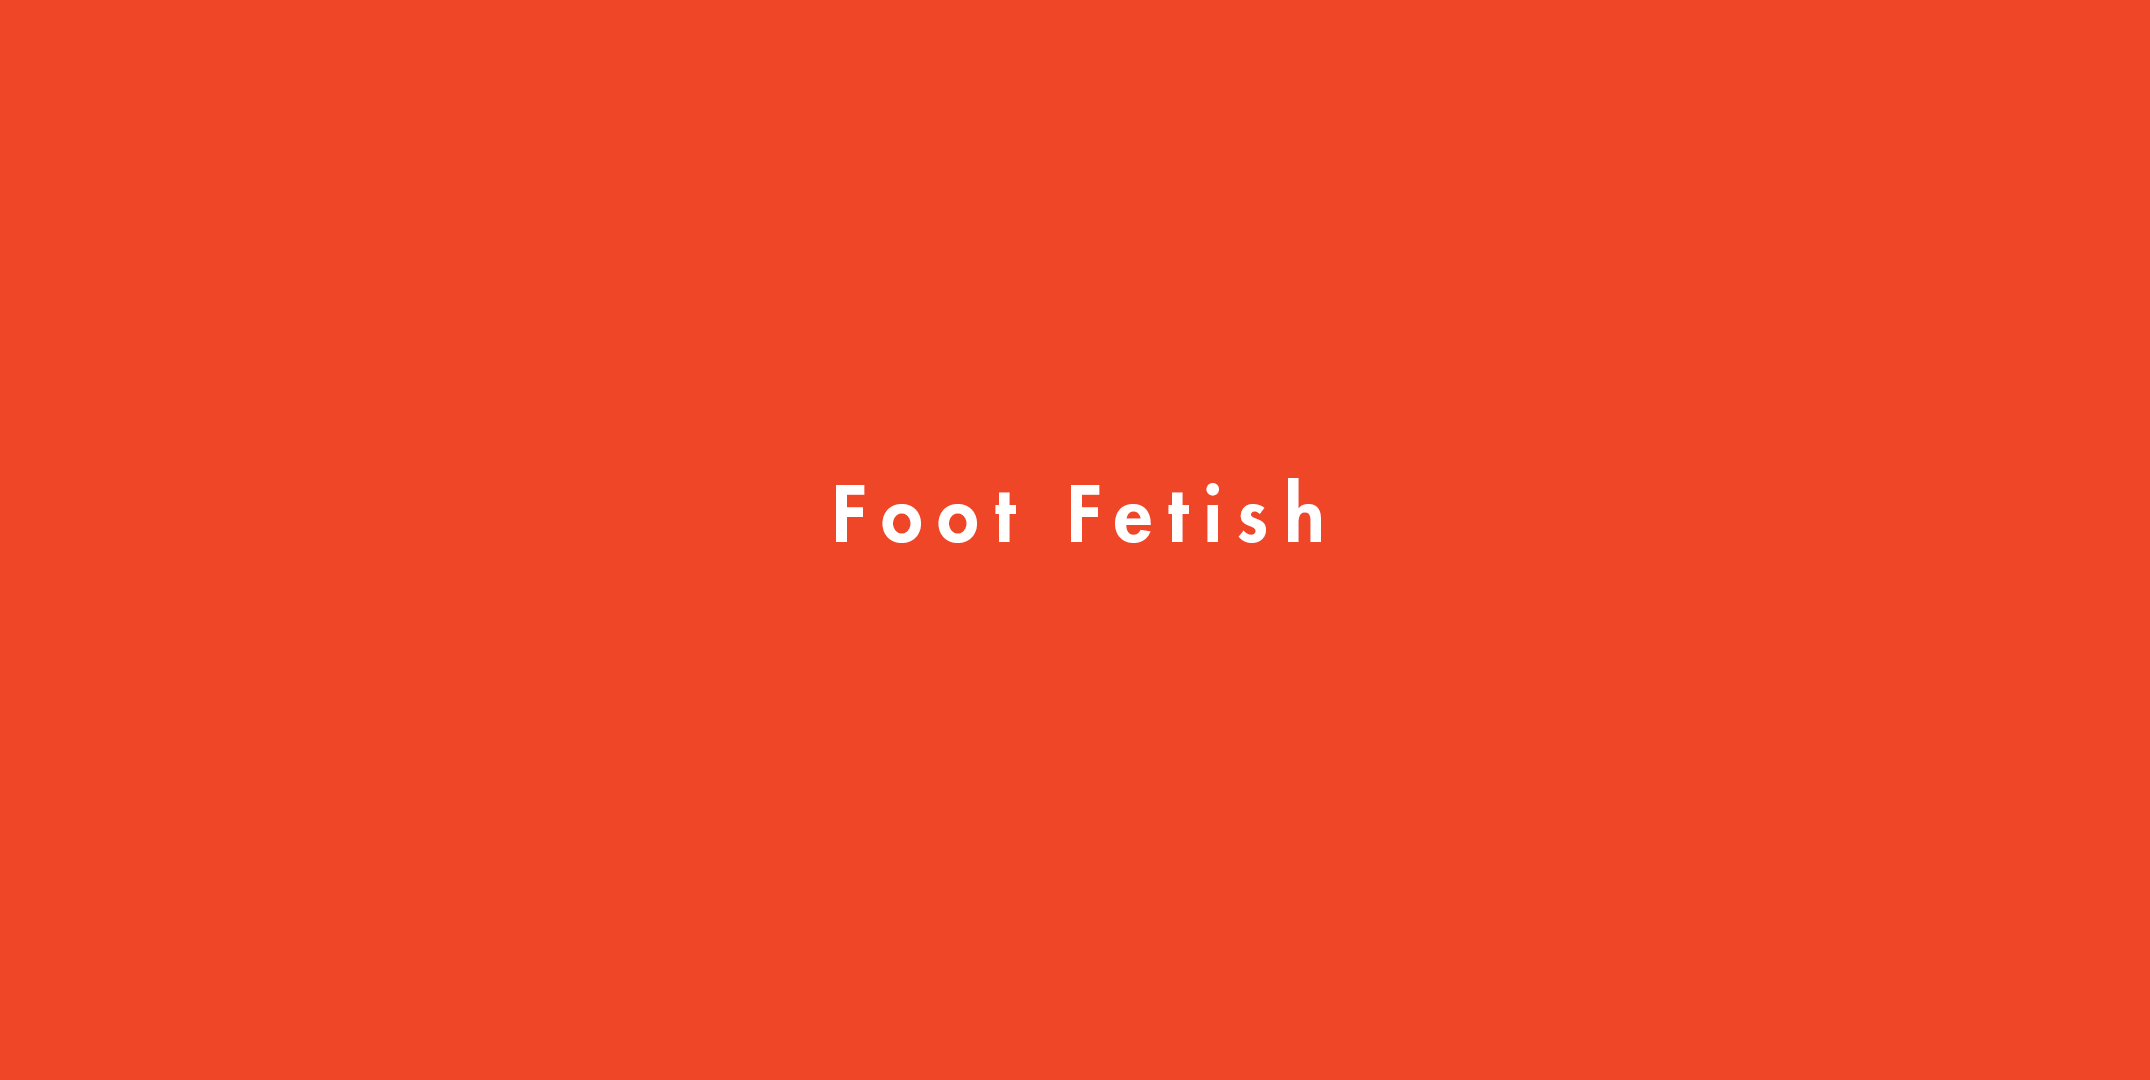 Foot Fetish Foreplay - What Is a Foot Fetish - All About Foot Jobs, Worship, and Fetishes